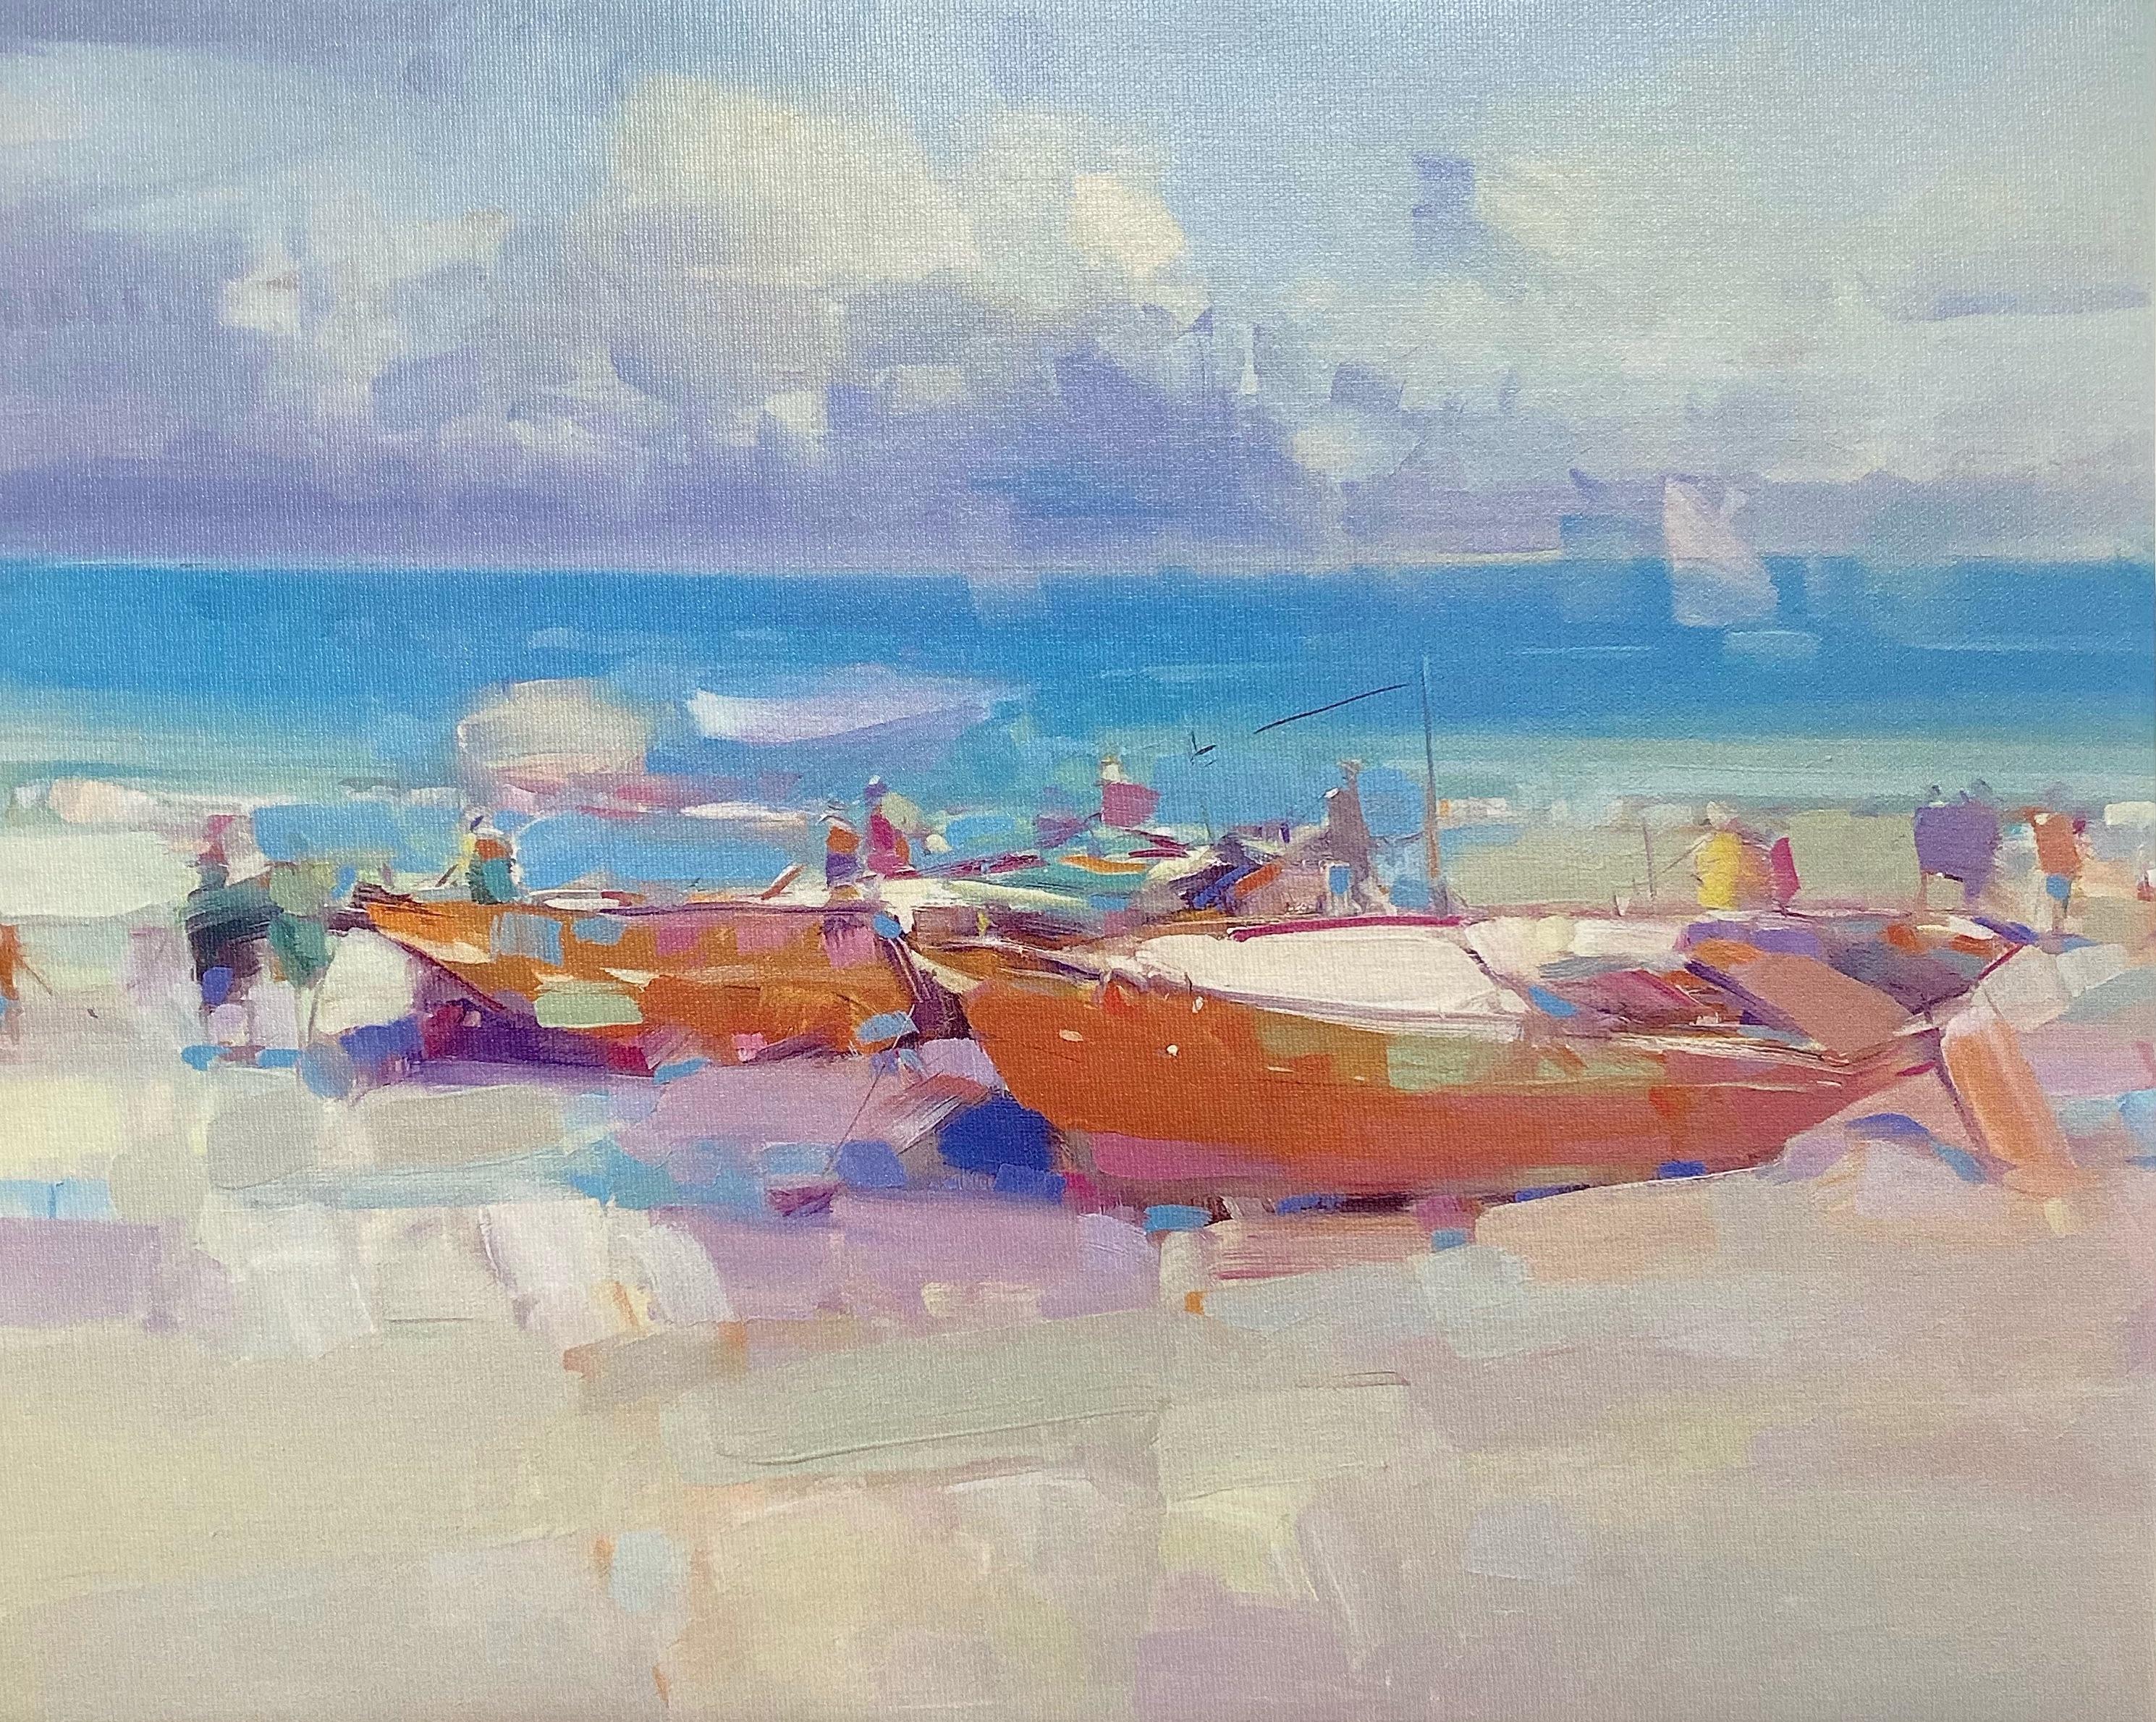 Vahe Yeremyan Landscape Painting - Boats on the Shore, Print on Canvas